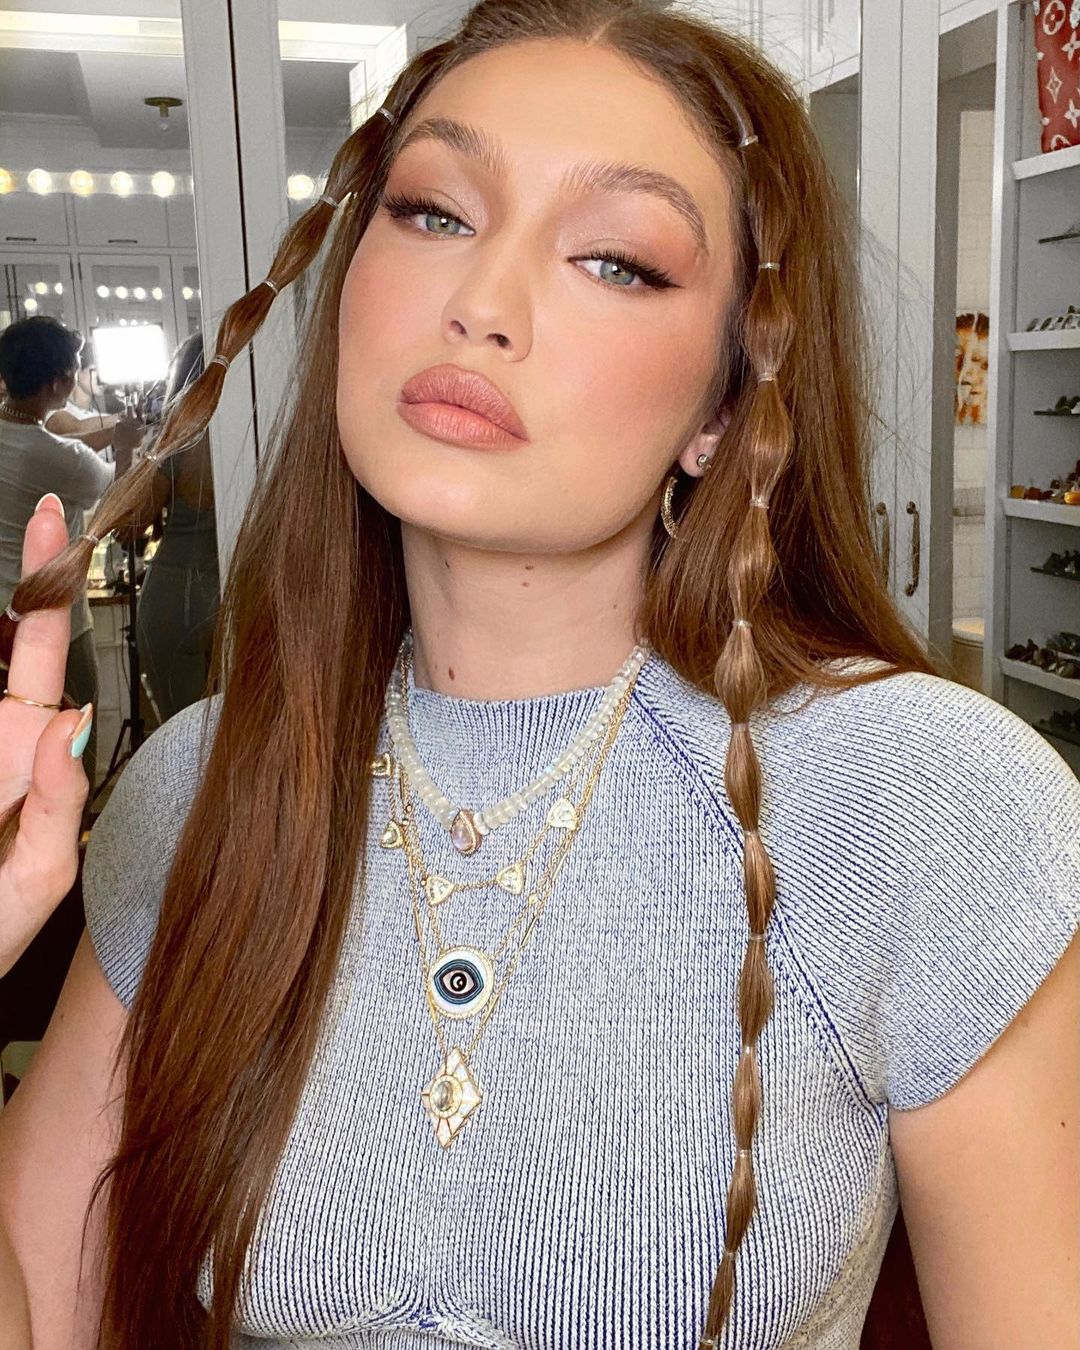 Trending Hairstyles: Gigi Hadid with bubble braids